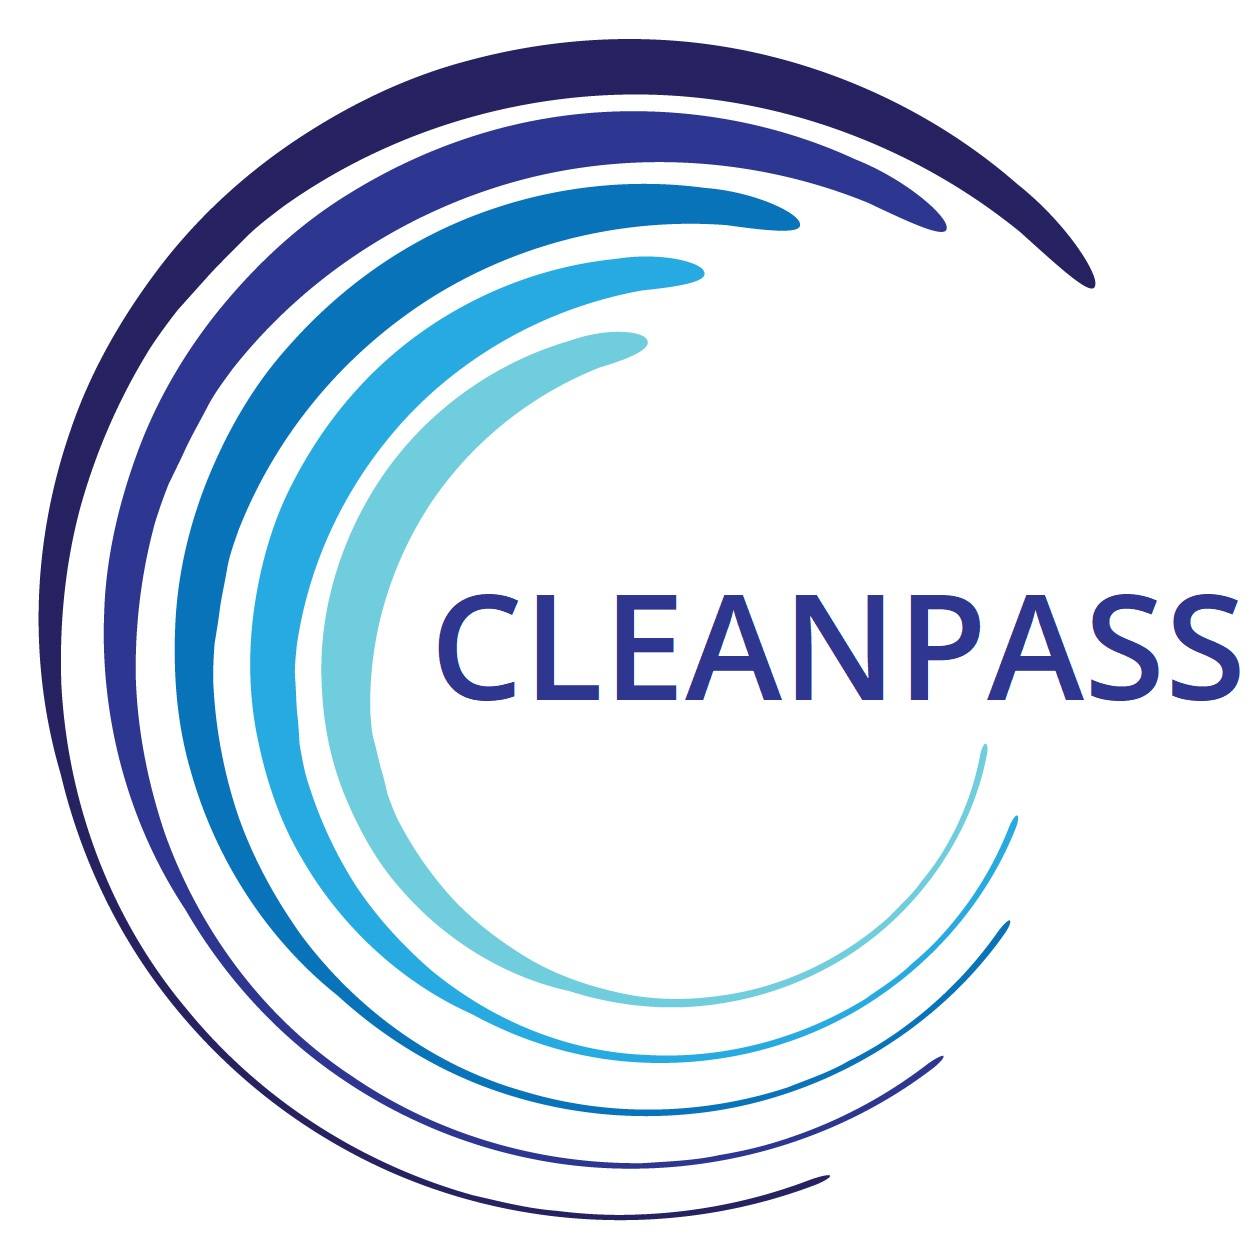 Cleanpass Services